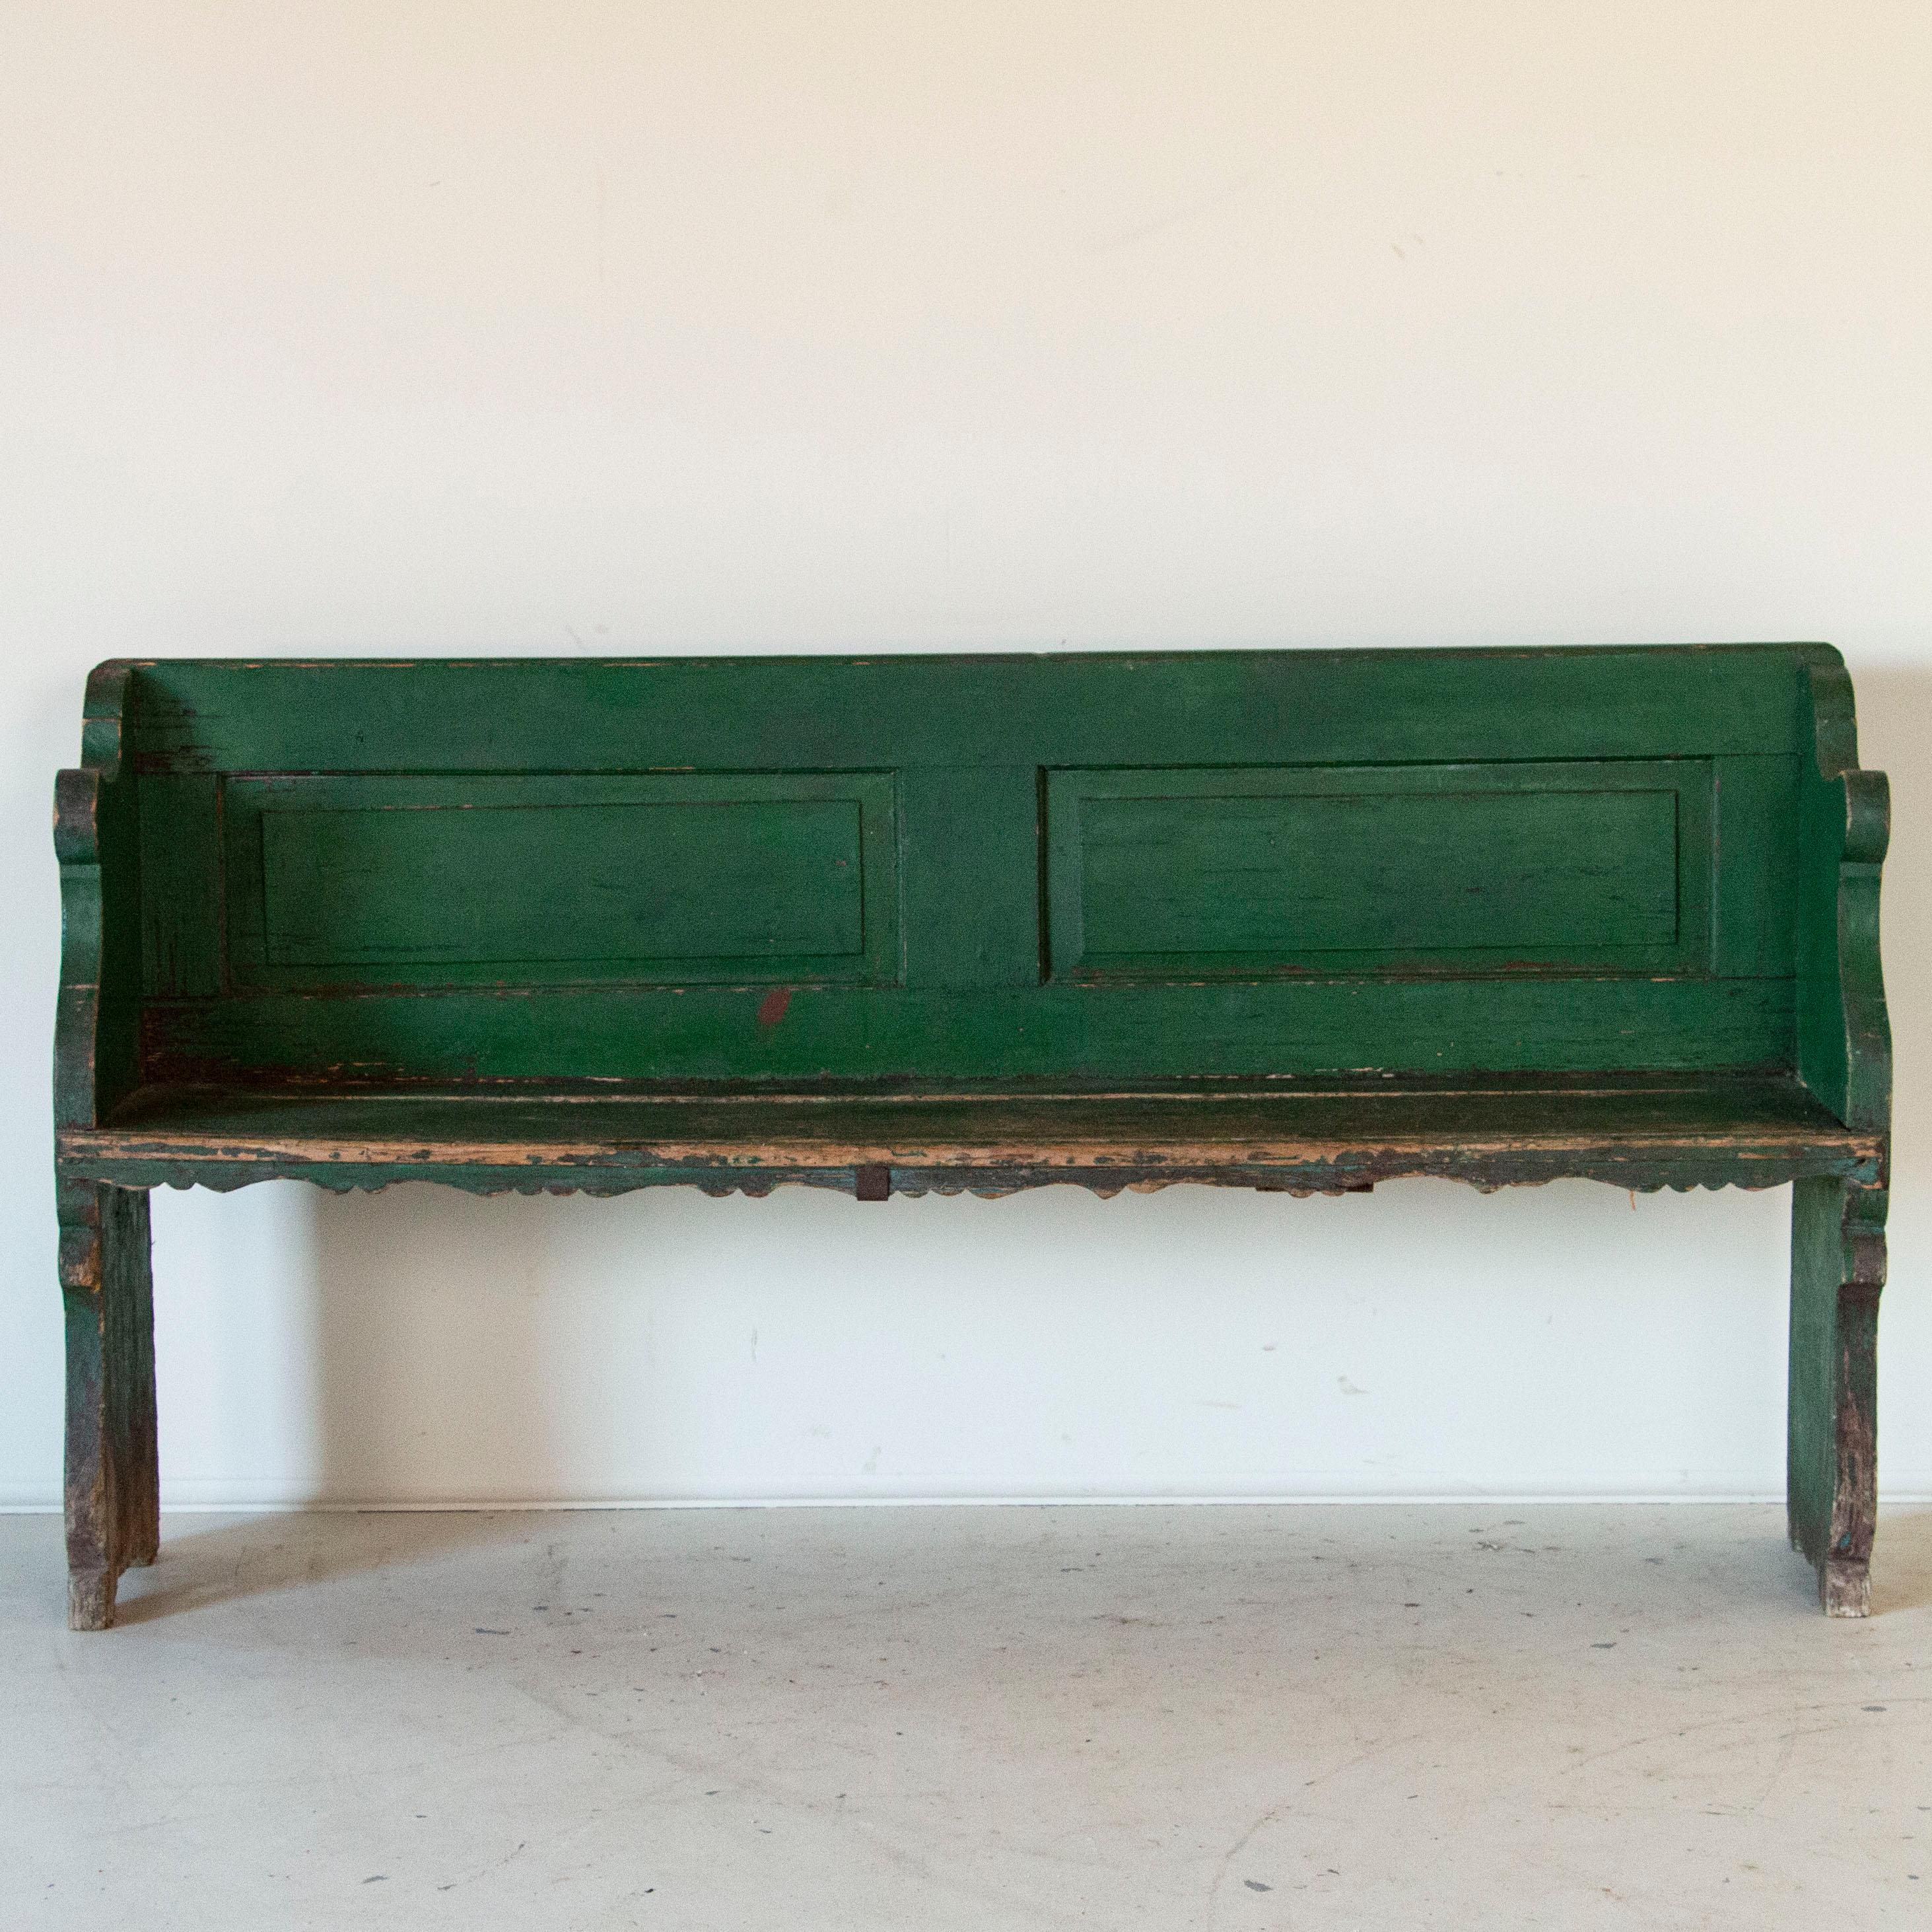 This delightful country bench still maintains its original vibrant green paint reminscent of green rolling hills and spacious pastures. Due to time and use, the green paint on the seat has been worn to the natural pine below, with minor